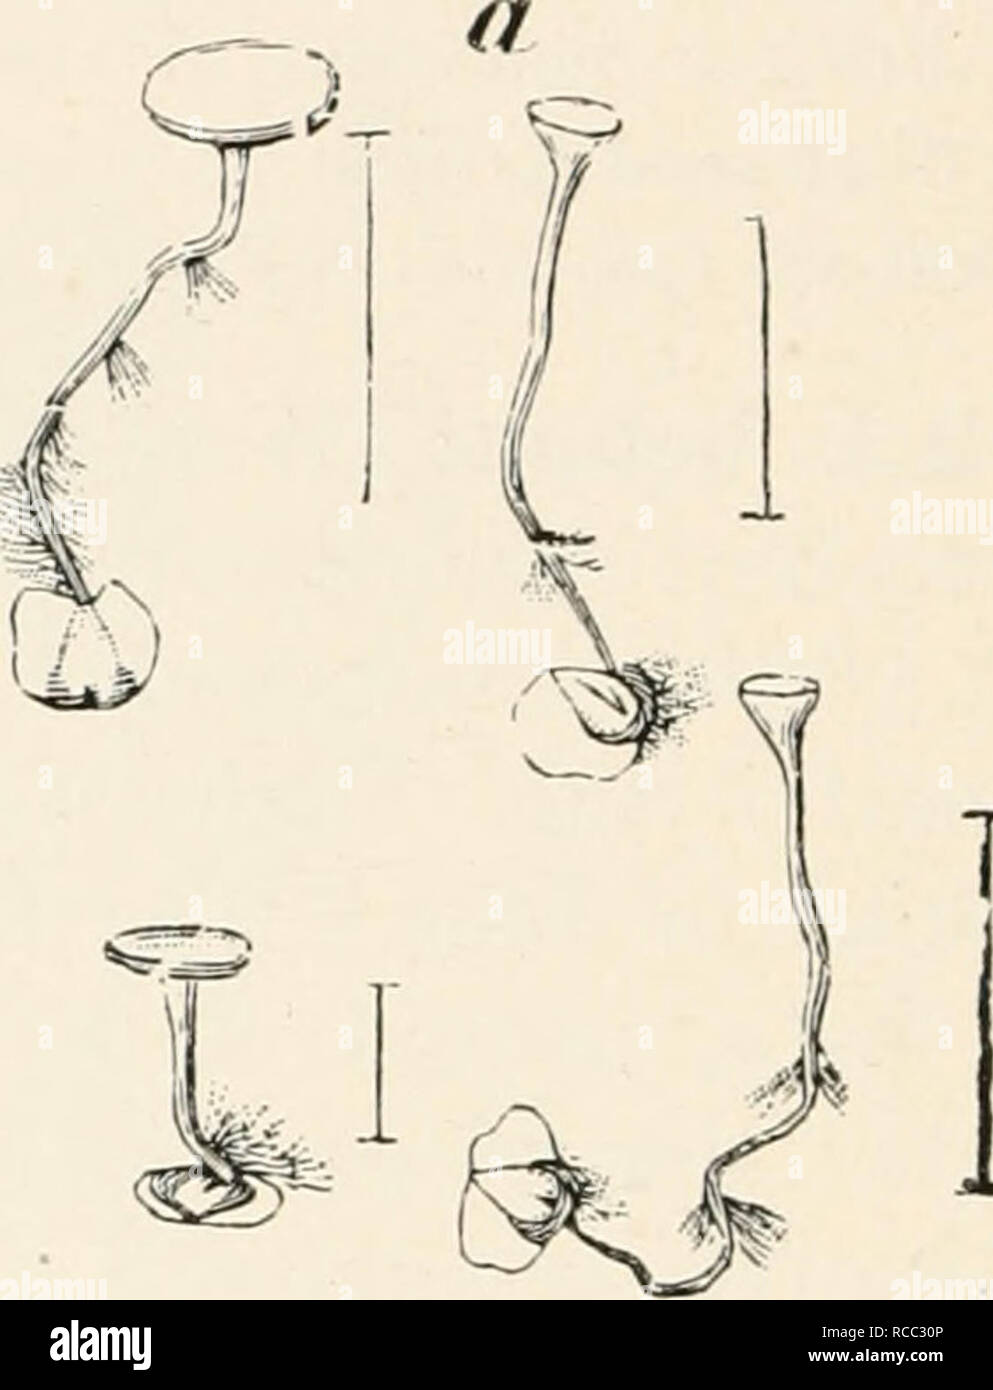 . Diseases of plants induced by cryptogamuc parasites; introduction to the study of pathogenic fungi, slime-fungi, bacteria, and algae. English ed. by William G. Smith. Plant diseases; Parasitic plants. .:yyv-:^. Fig. 139.—Sclerotinia hetulae. a, Birch fruits with sclerotia, which have germinated and formed cup-hke apothecial discs; rhizoids have developed on the stalks, h, Birch fruit, somewhat enlarged, with semilunar sclerotia. (After Nawaschin.) Hormoviyia hetulae Wtz. often occurs along with the above. It causes the production of thick spherical fruits with little or no wing. Sclerotinia Stock Photo